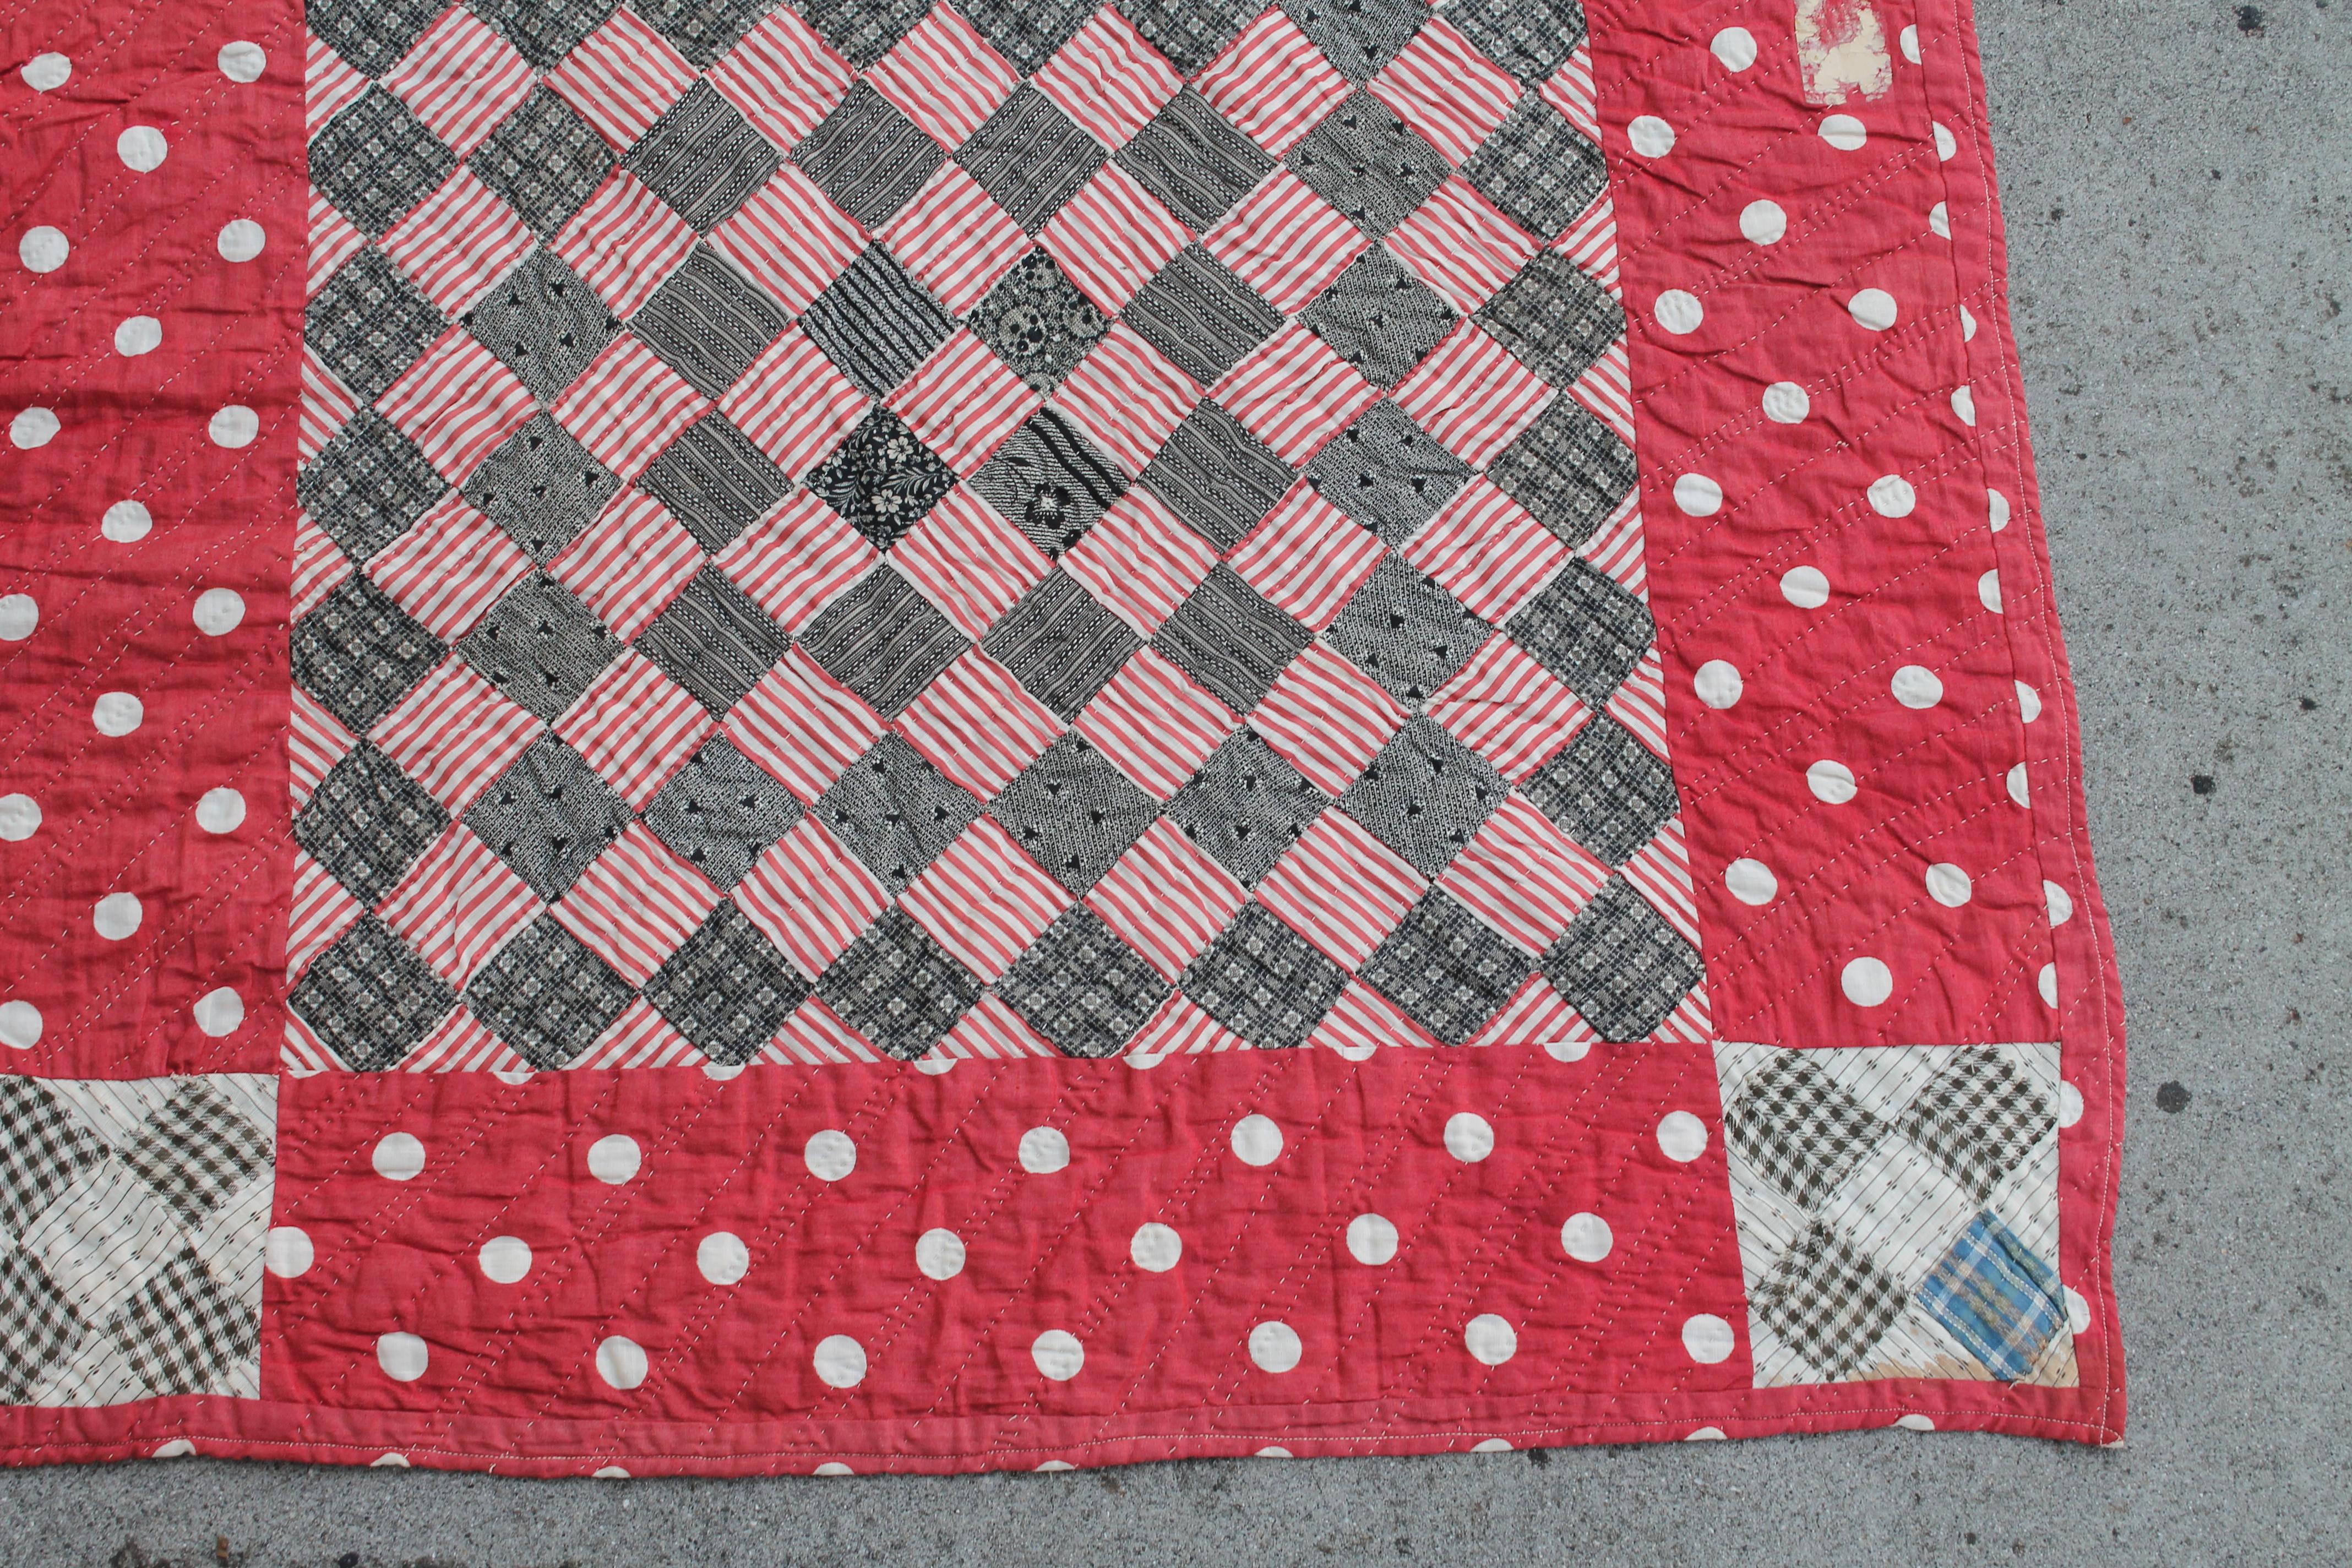 Country Antique Quilt, 19th Century Contained Postage Stamp Quilt